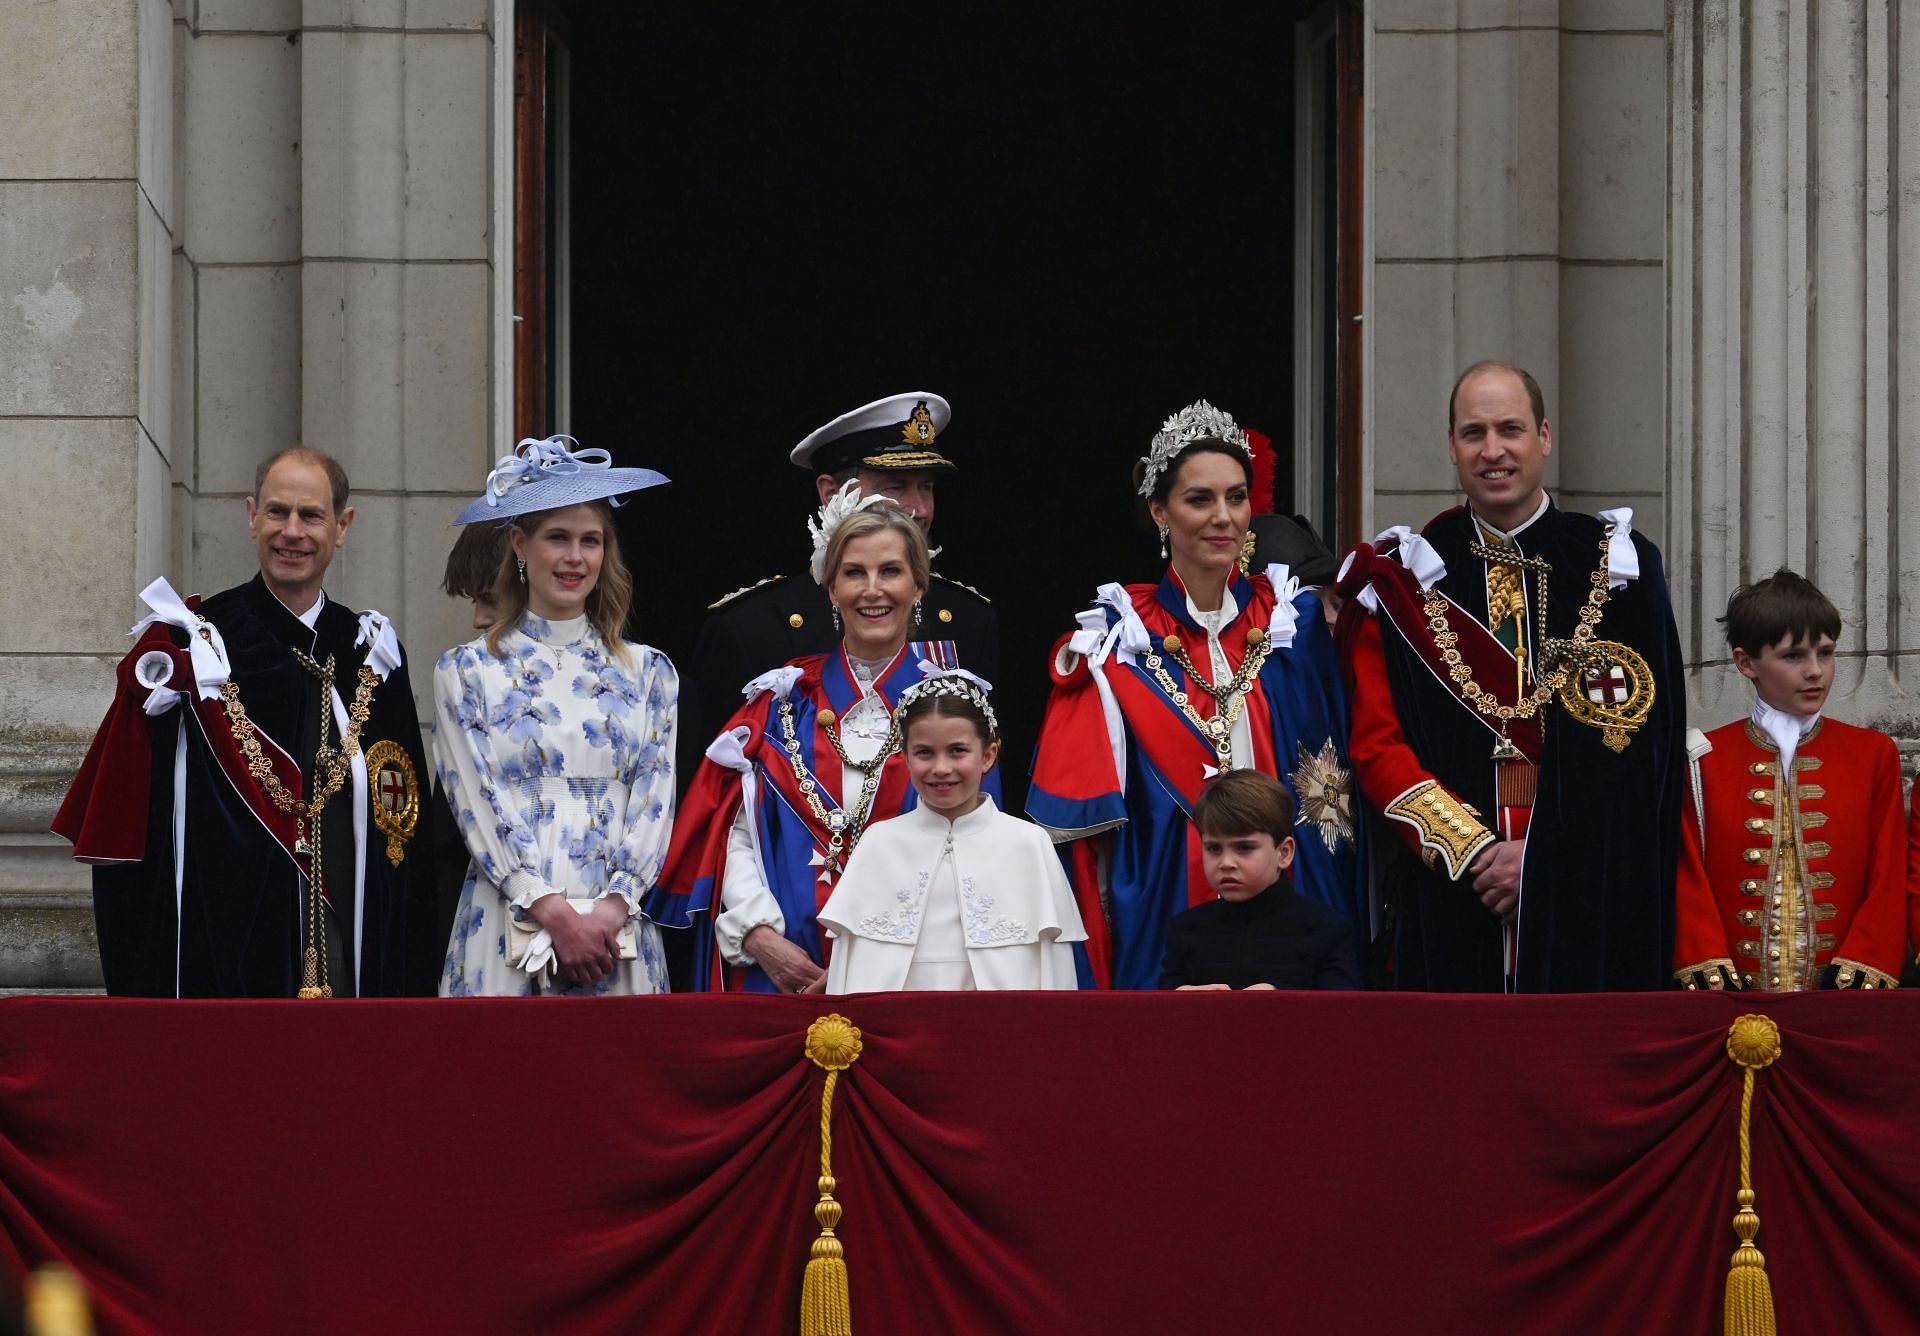 Their Majesties King Charles III And Queen Camilla - Coronation Day (Source: Getty)